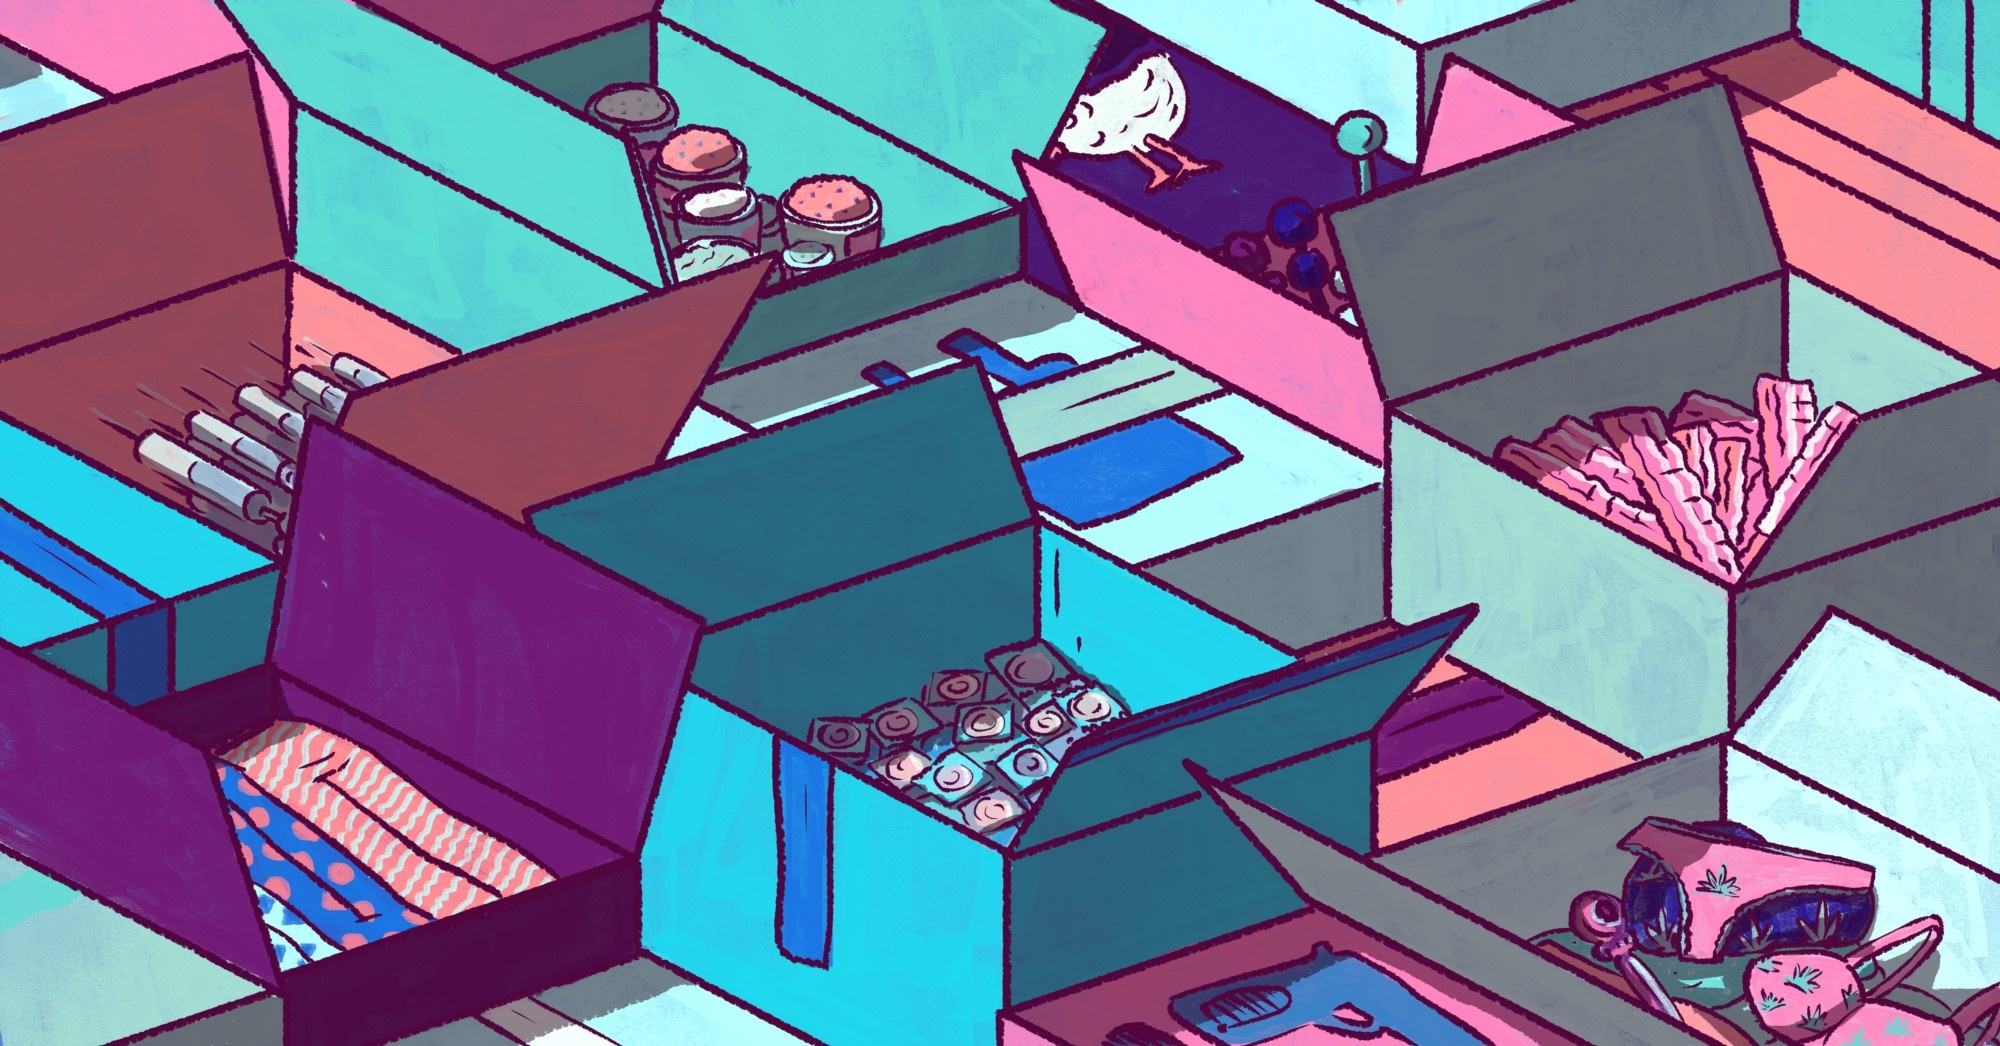 Drawing of various pink, purple and blue subscription boxes on a conveyor belt.